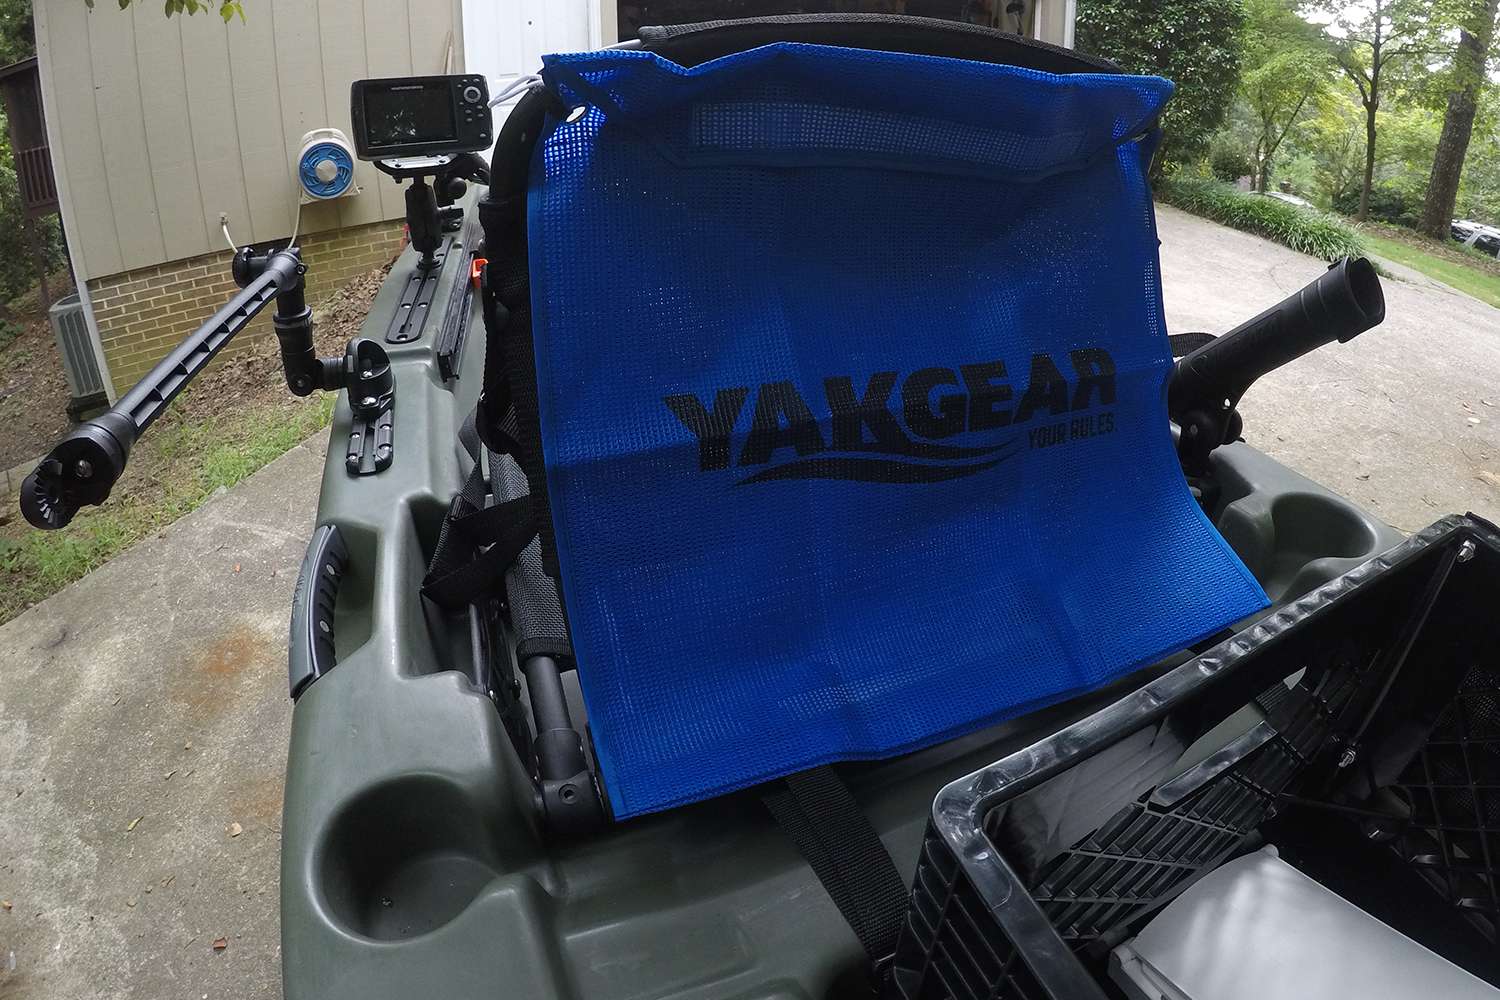 On the rear of the captain's chair is a YakGear storage bag, good for whatever you feel needs to be brought along: Extra tackle, clothes, food, water--you name it. Extra storage is always handy when fishing from a kayak.